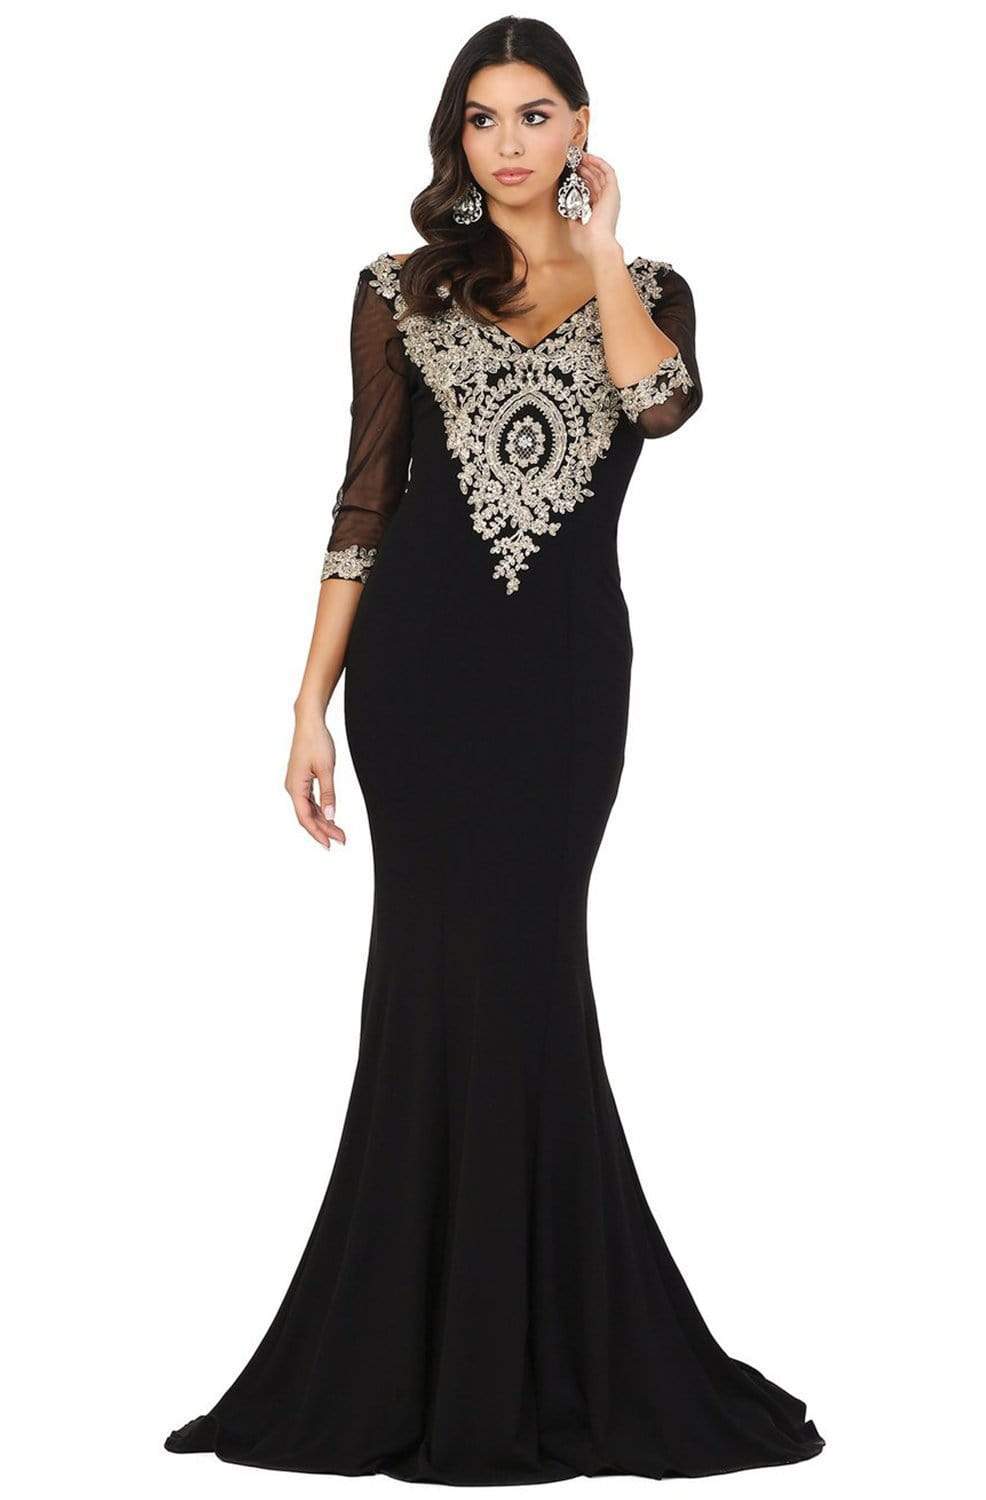 Dancing Queen - 2911 Lace Appliqued V Neck Mermaid Prom Dress Prom Dresses XS / Black